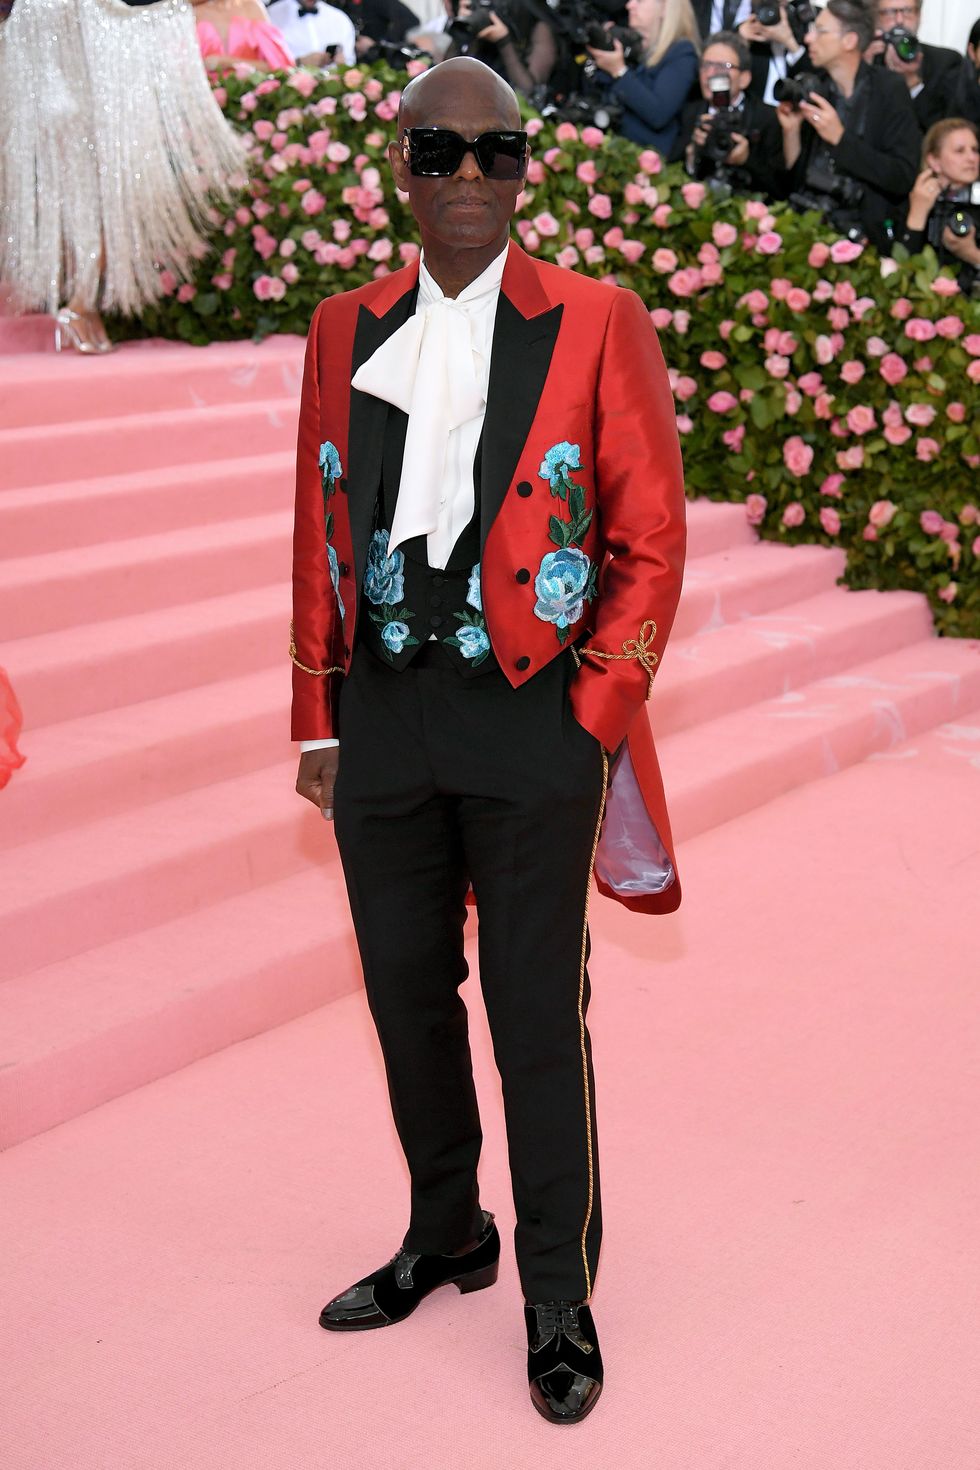 The Best-Dressed Men From The Met Gala 2019